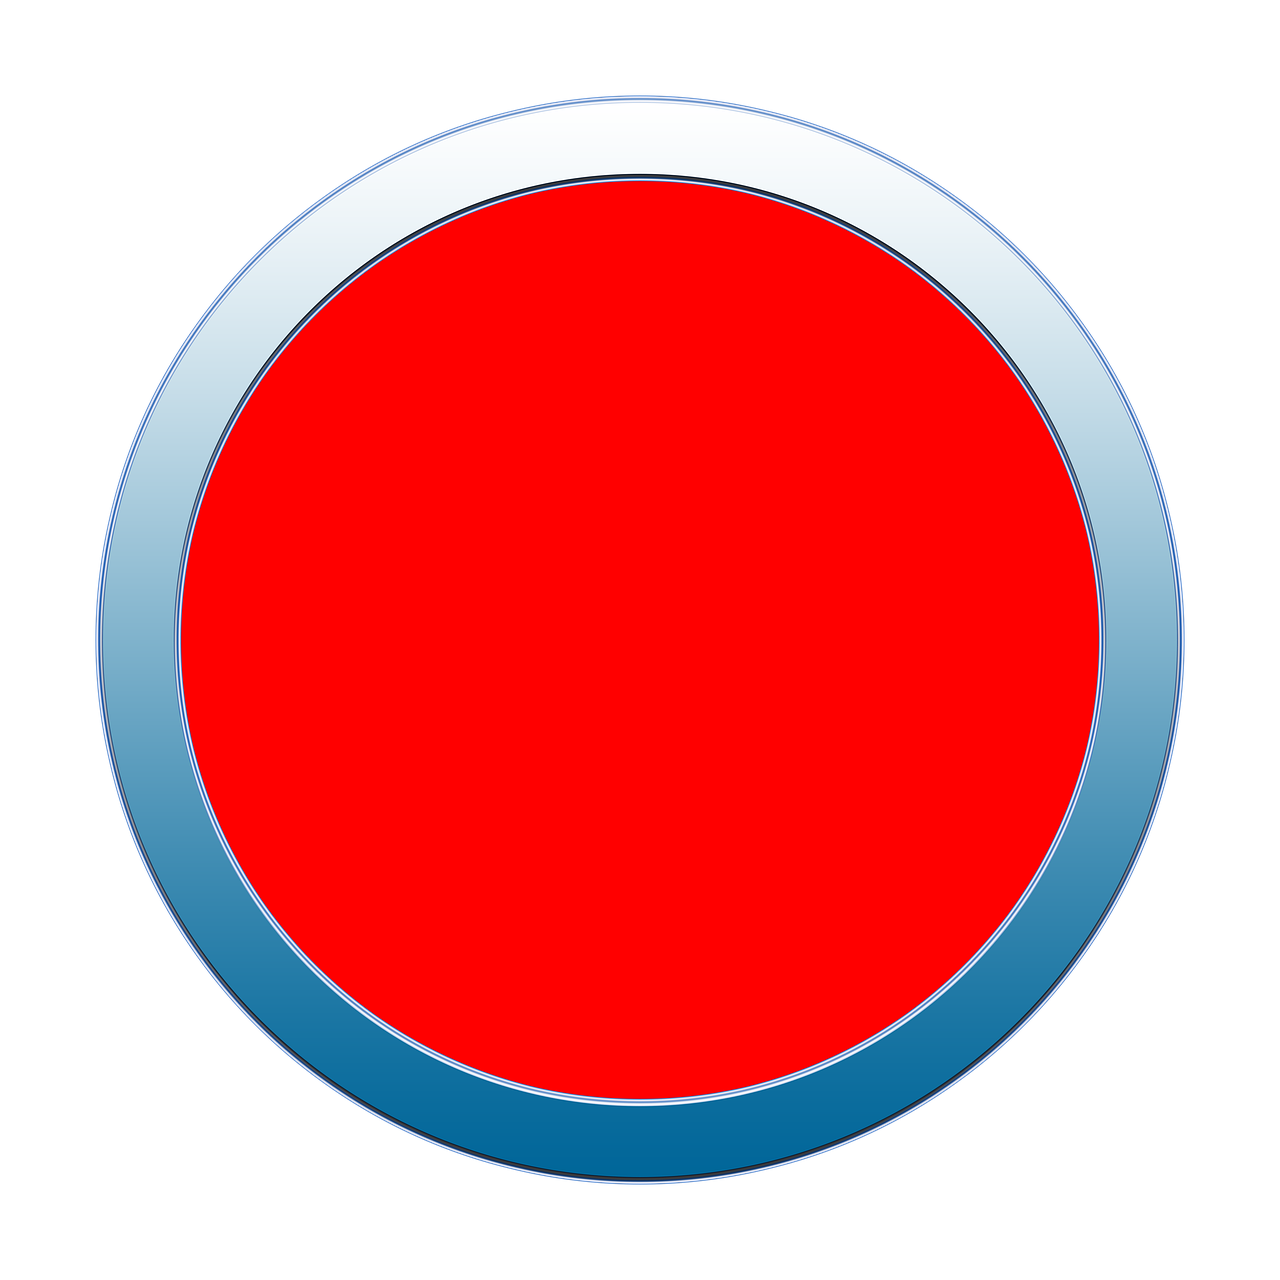 a red and blue button on a black background, a stock photo, computer art, round form, japan, blue border, color footage